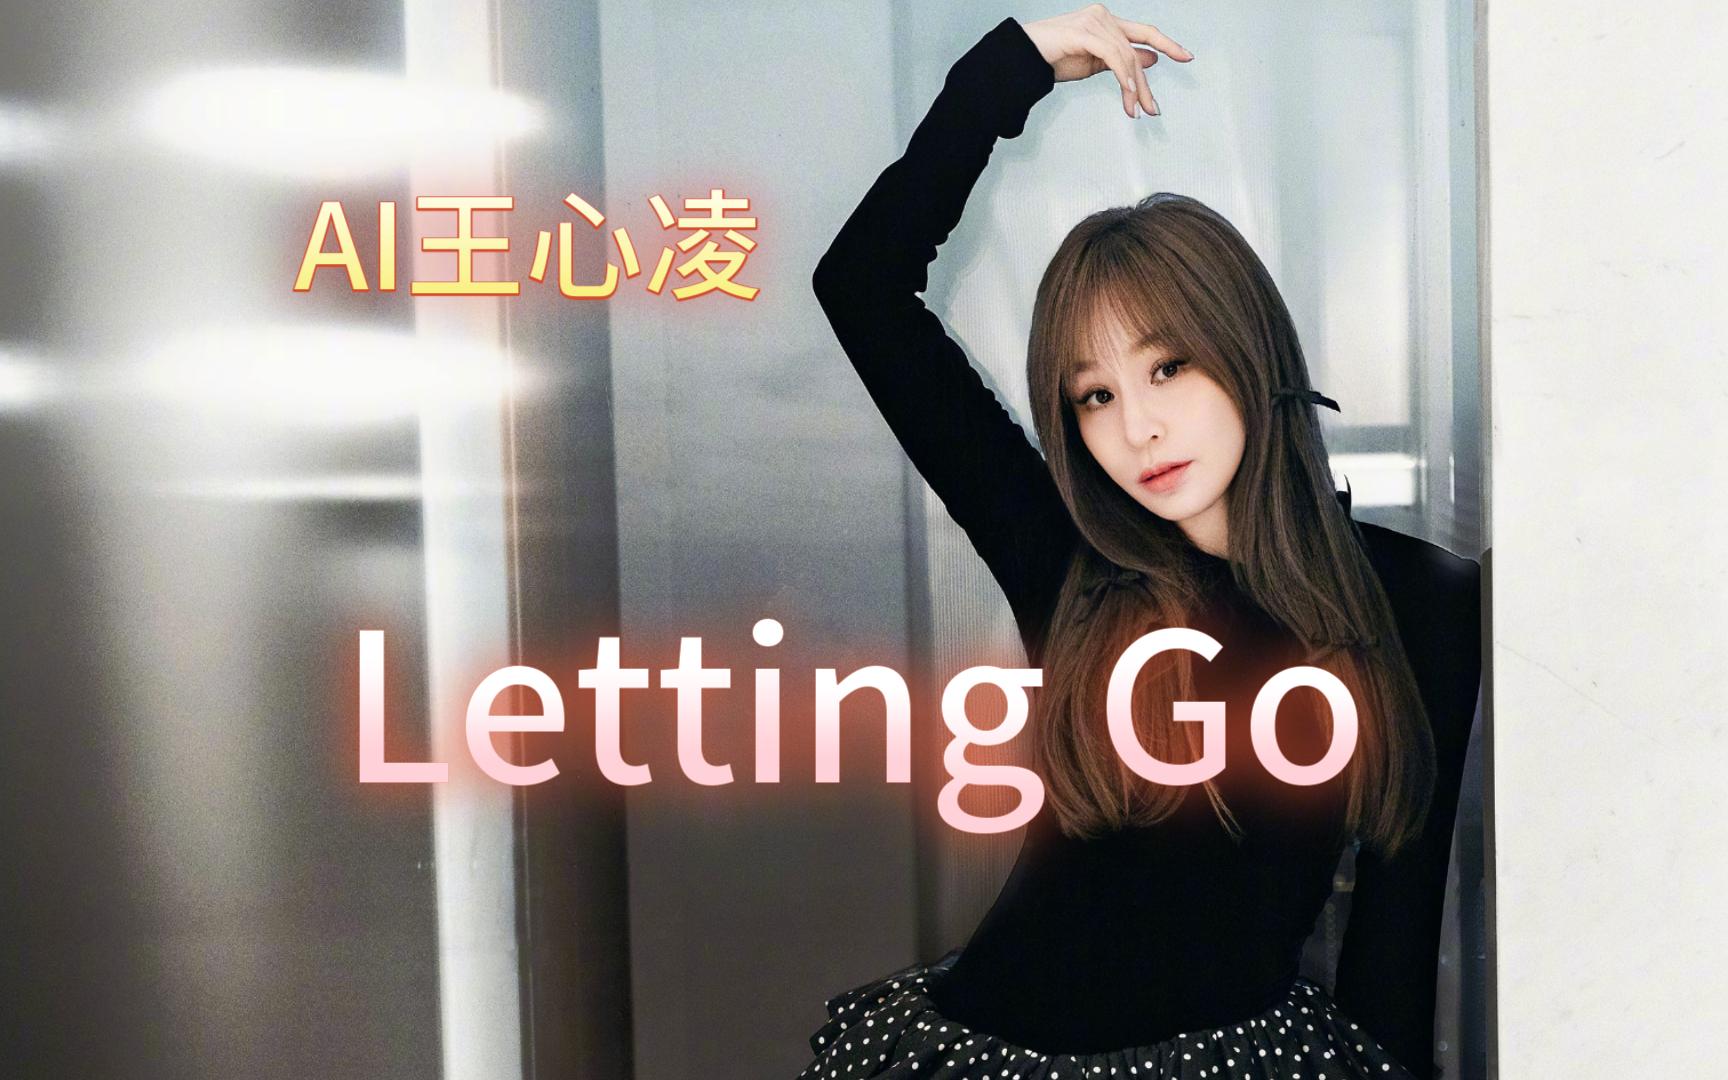 AI王心凌《Letting Go》Cover_蔡健雅